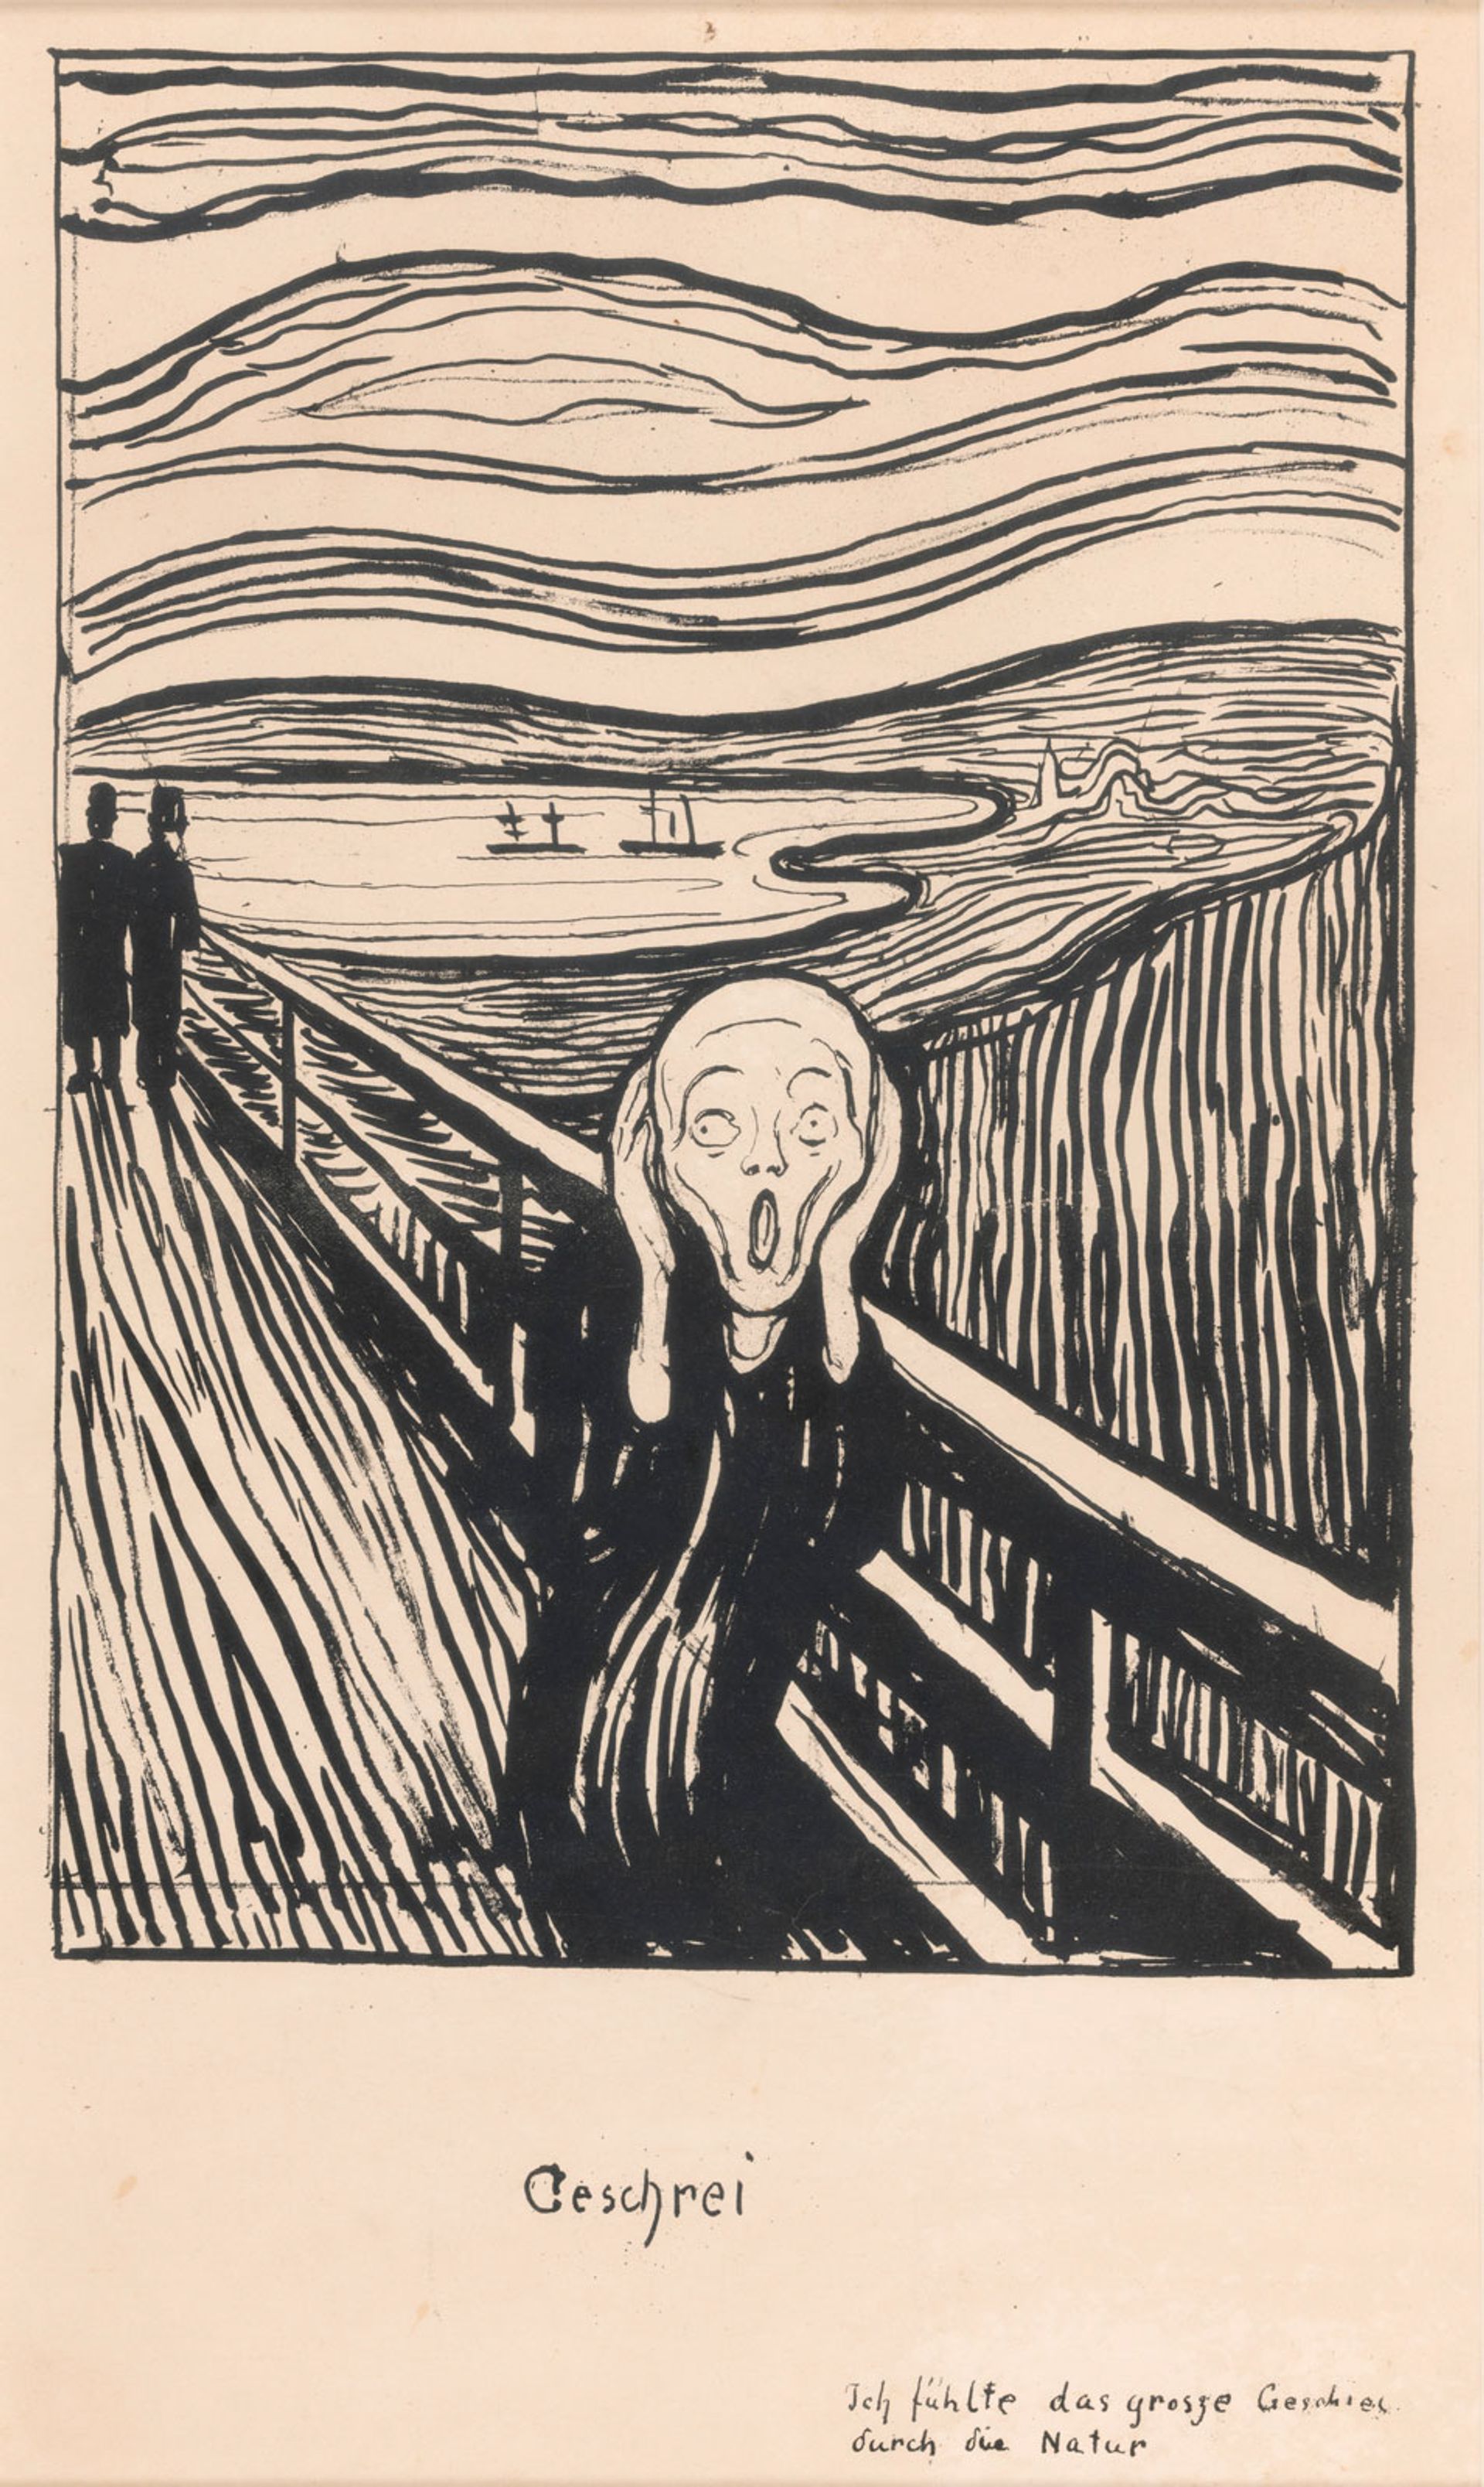 Edvard Munch, The Scream (1895). Lithograph, private collection, Oslo. Photo: Thomas Widerberg